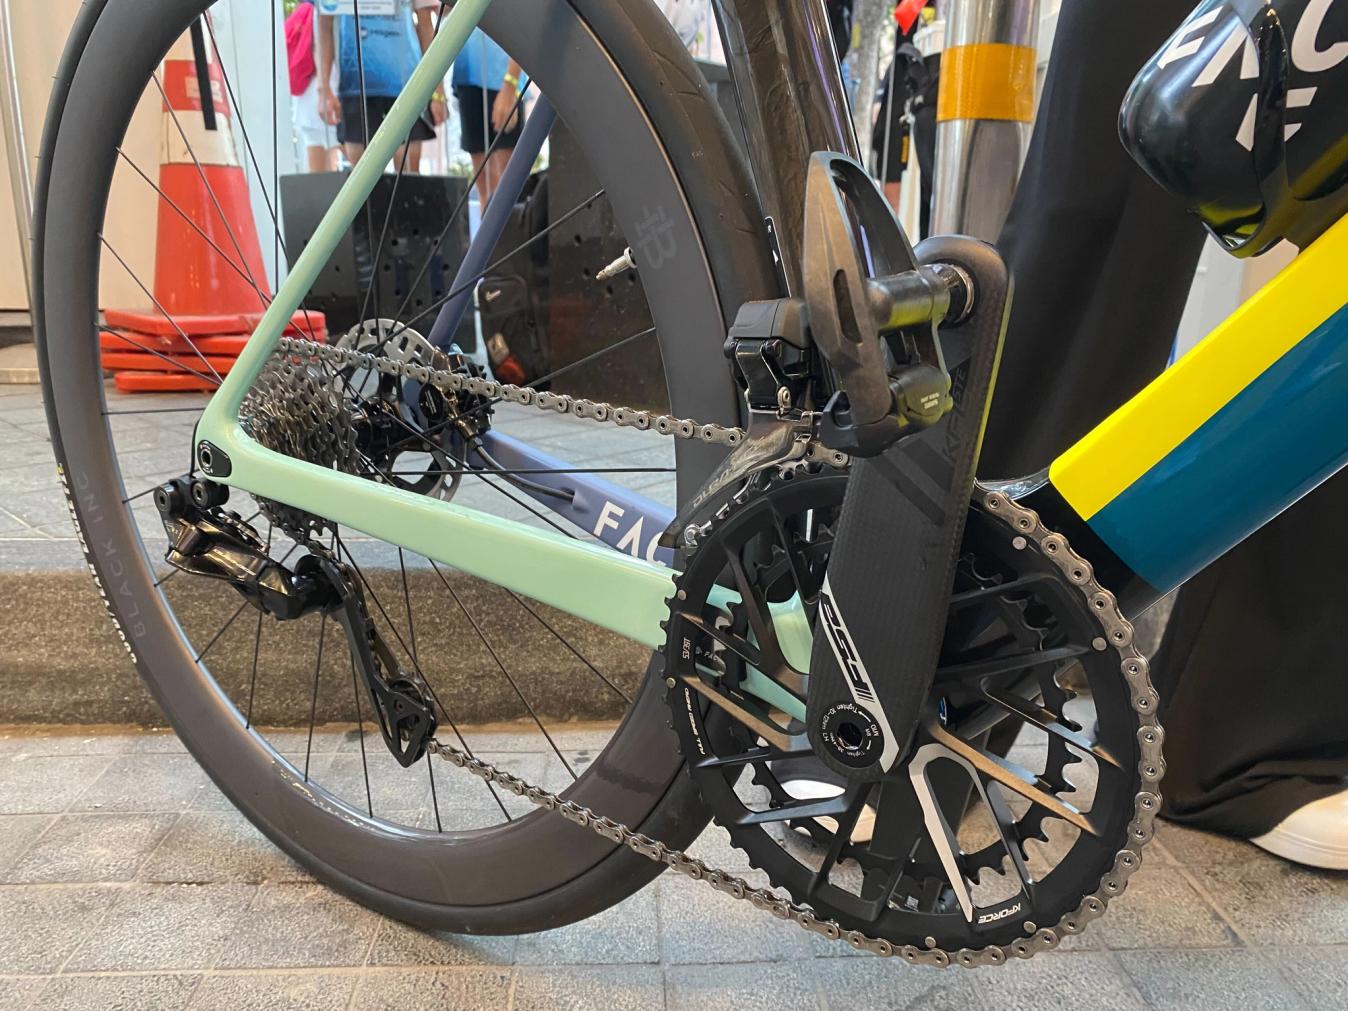 An FSA crankset on the otherwise Dura-Ace set-up